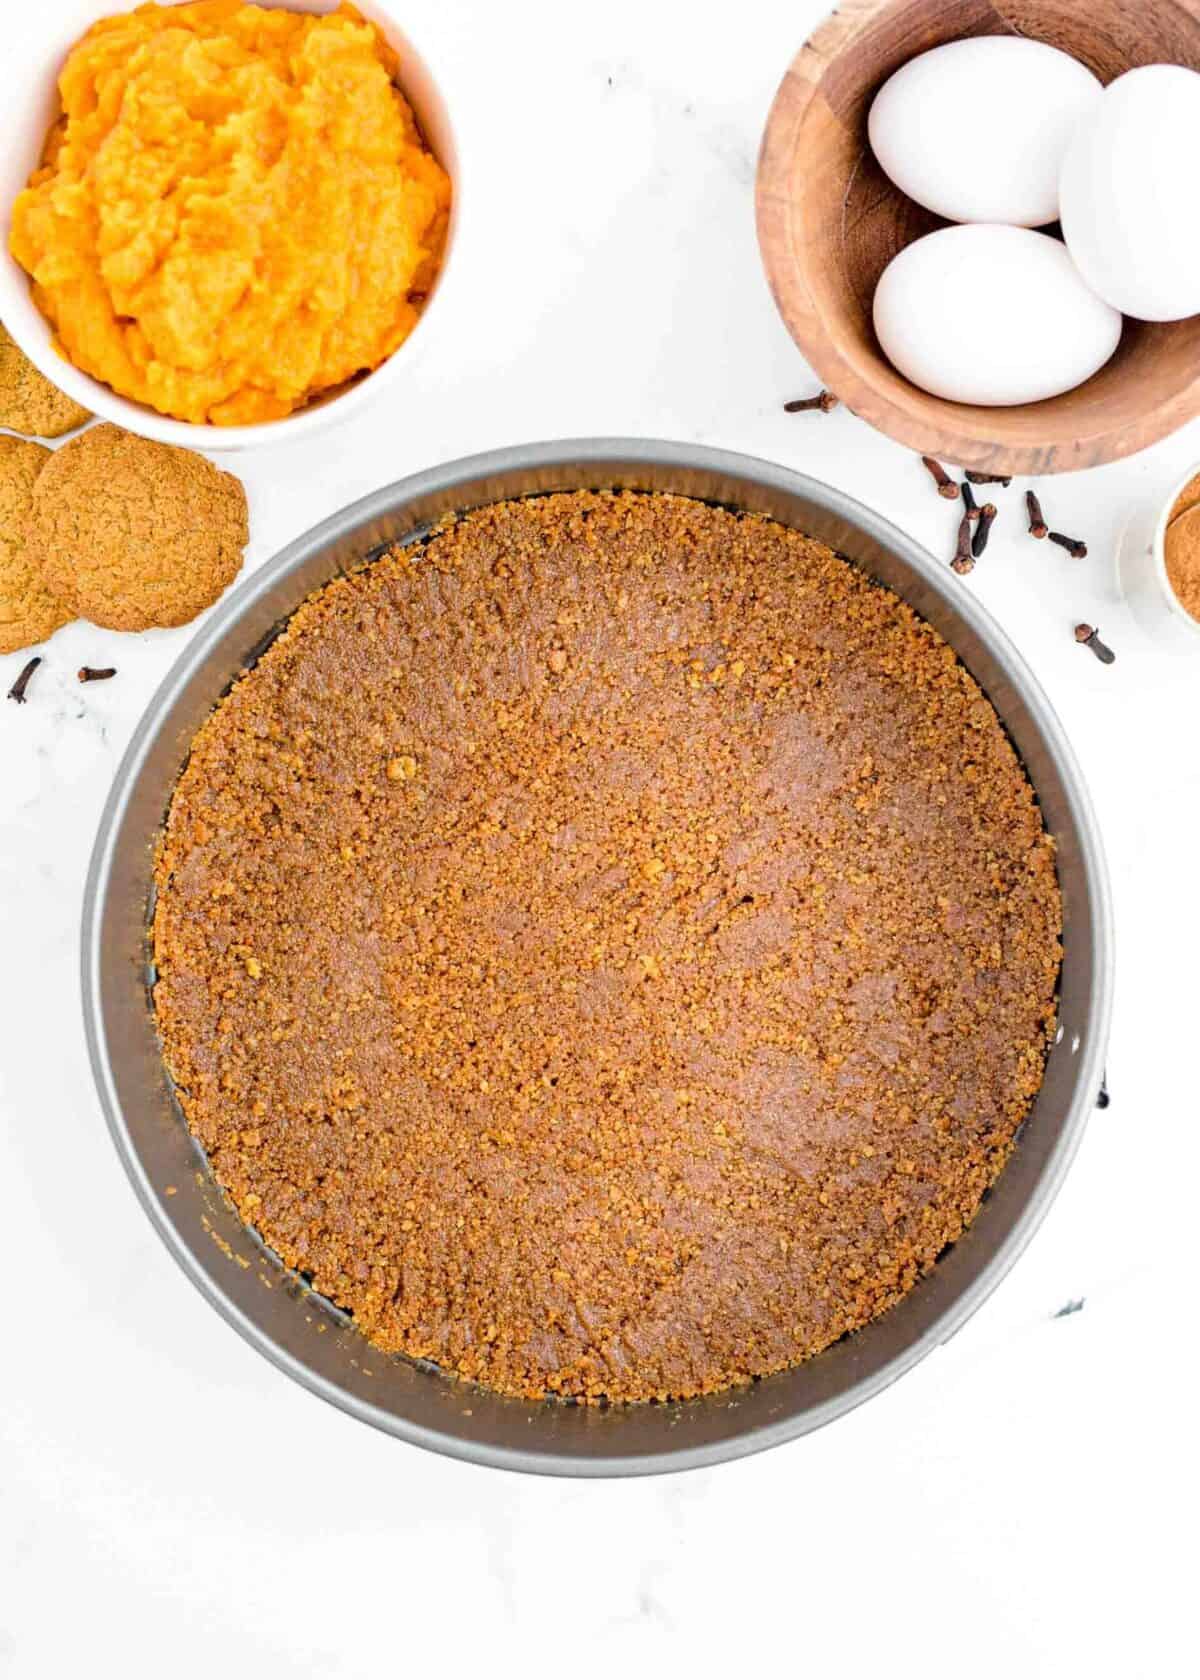 Gingersnap crust in a springform pan, surrounded by gingersnaps, eggs, and a bowl of pumpkin puree